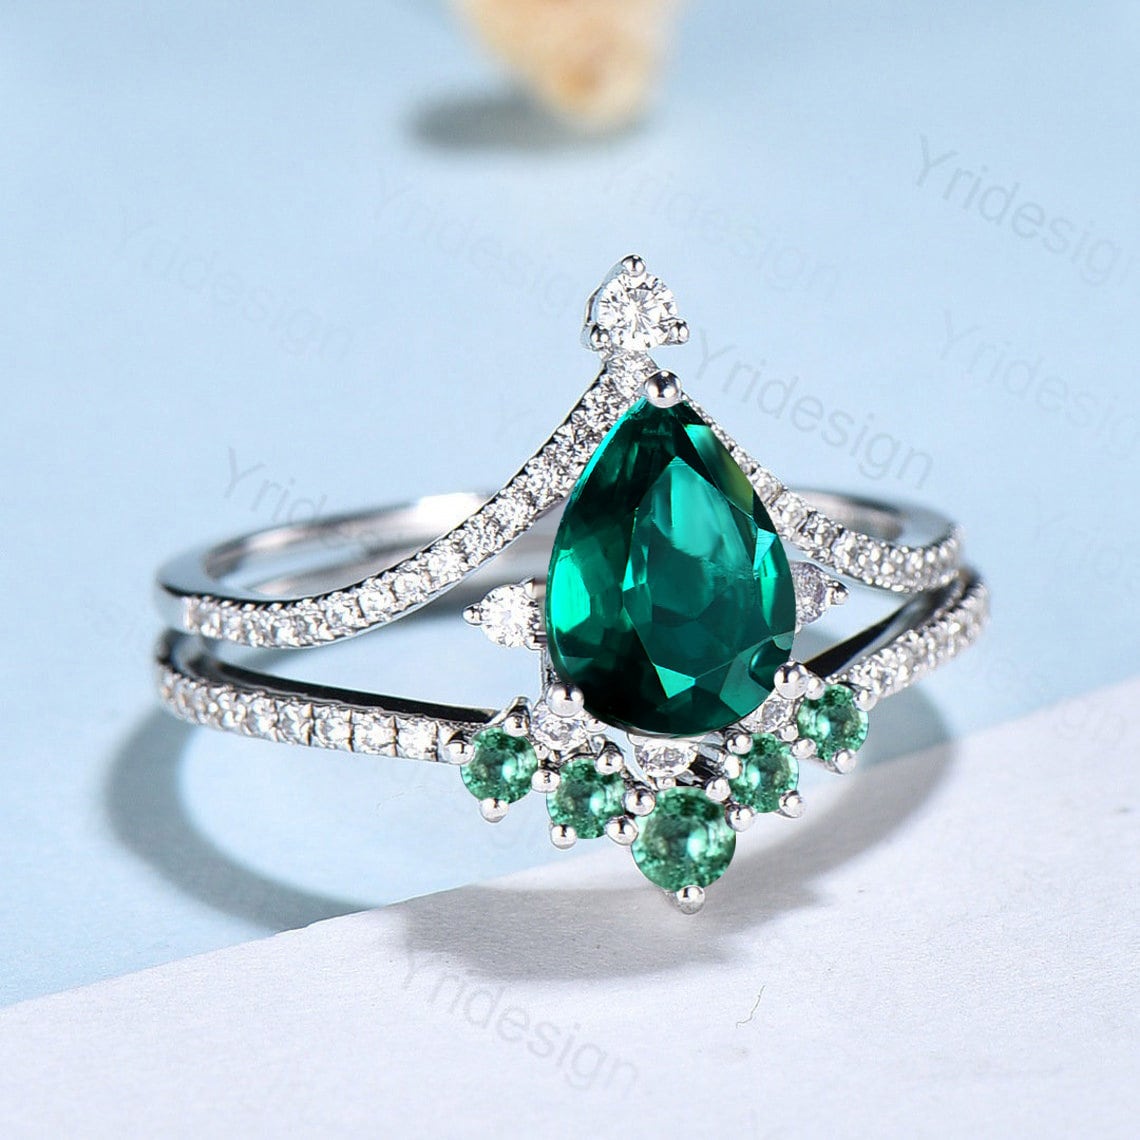 Vintage Pear shaped emerald wedding set art deco unique  emerald diamond engagement ring promise ring for women bridal ring Anniversary Gift - PENFINE